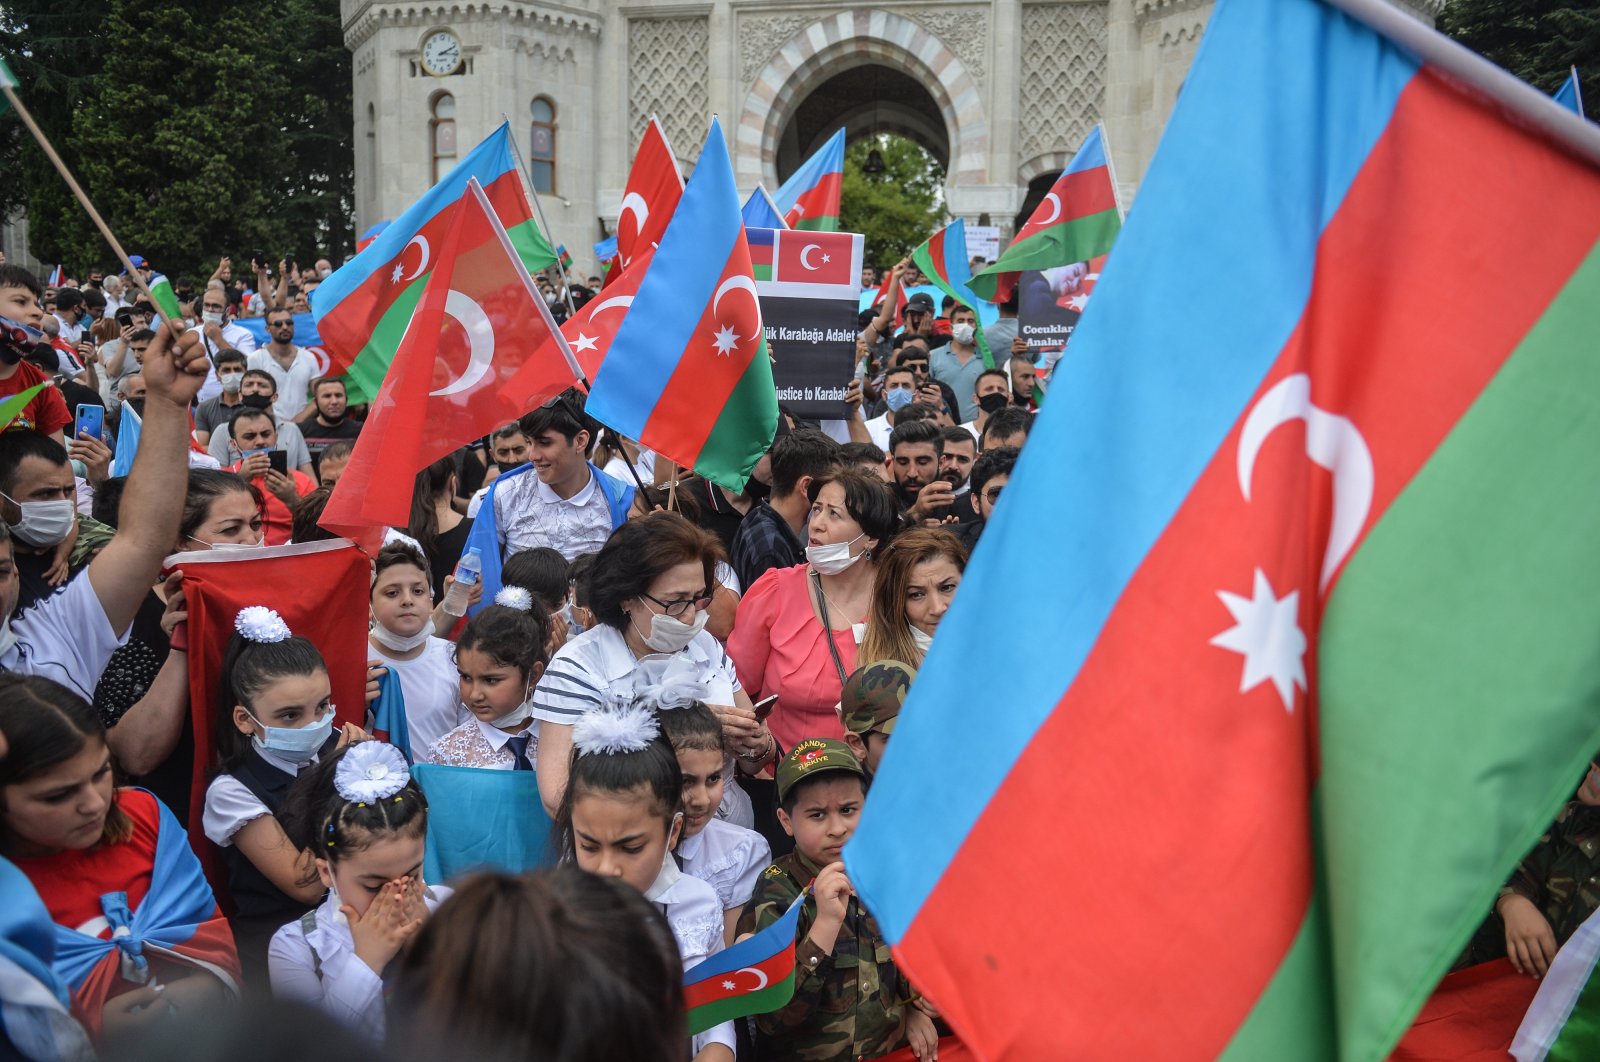 Protesters wave flags of Azerbaijan during a demonstration against Armenian aggression in Istanbul, Turkey, July 2020. (DHA Photo)